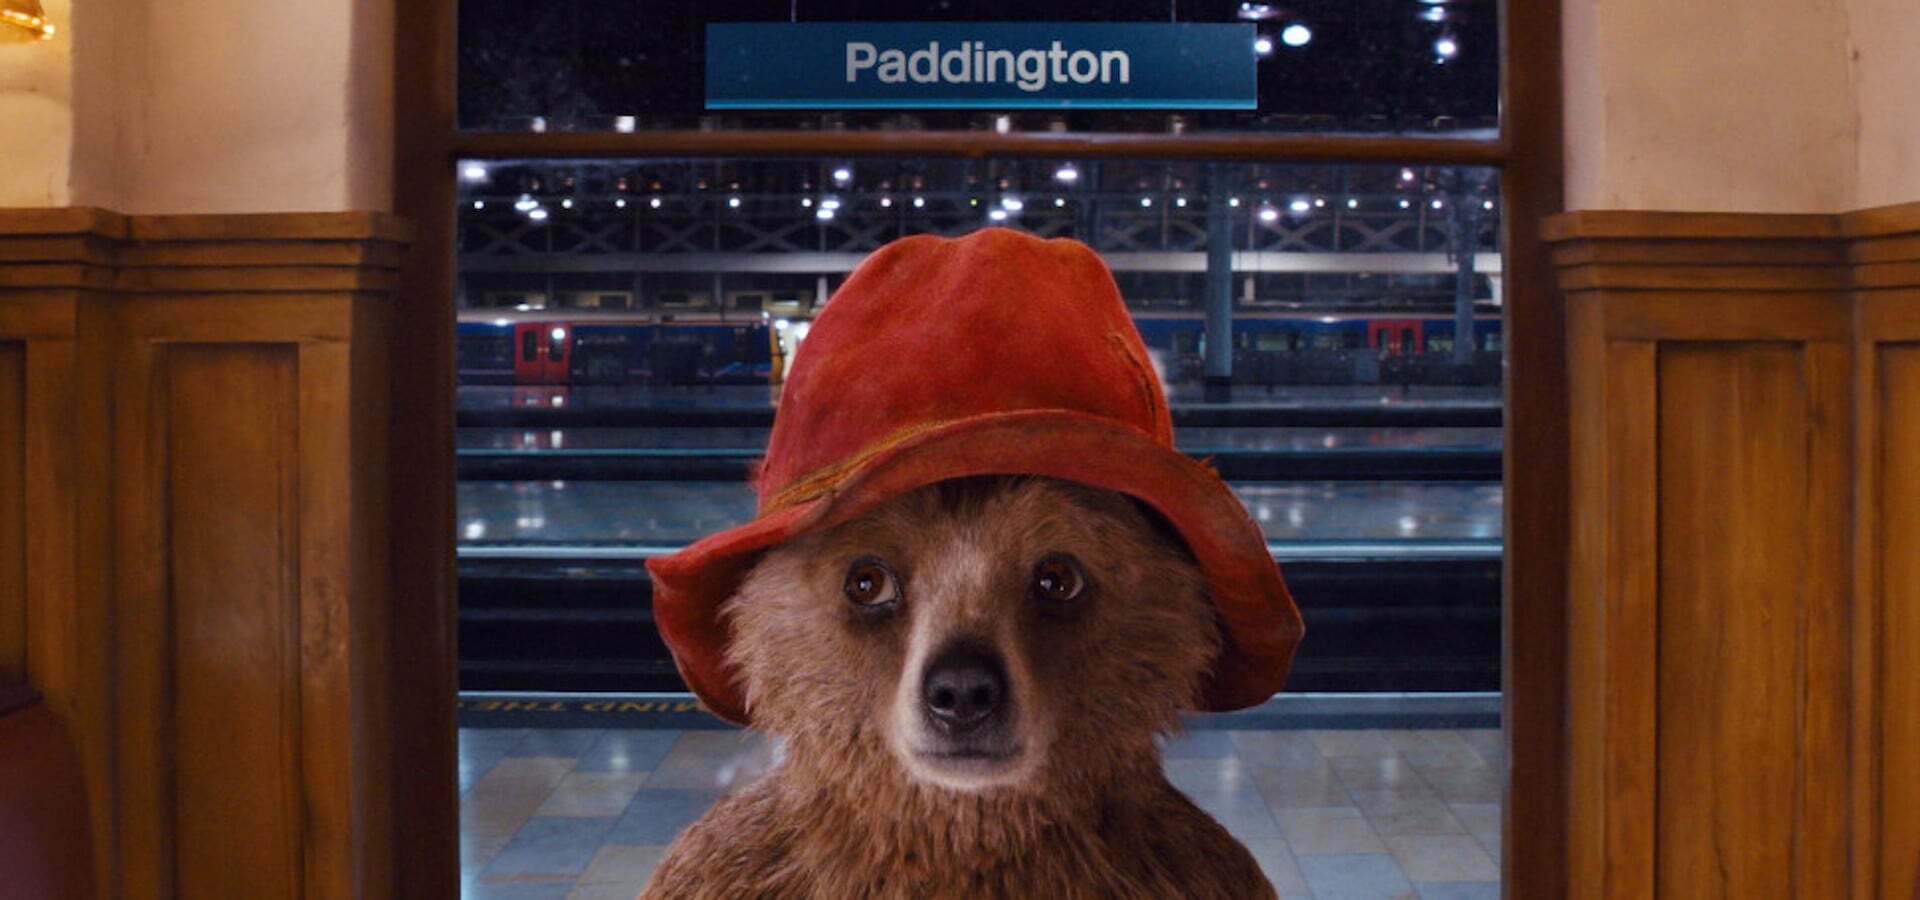 Paddington (2014): Introduced by Andy Day